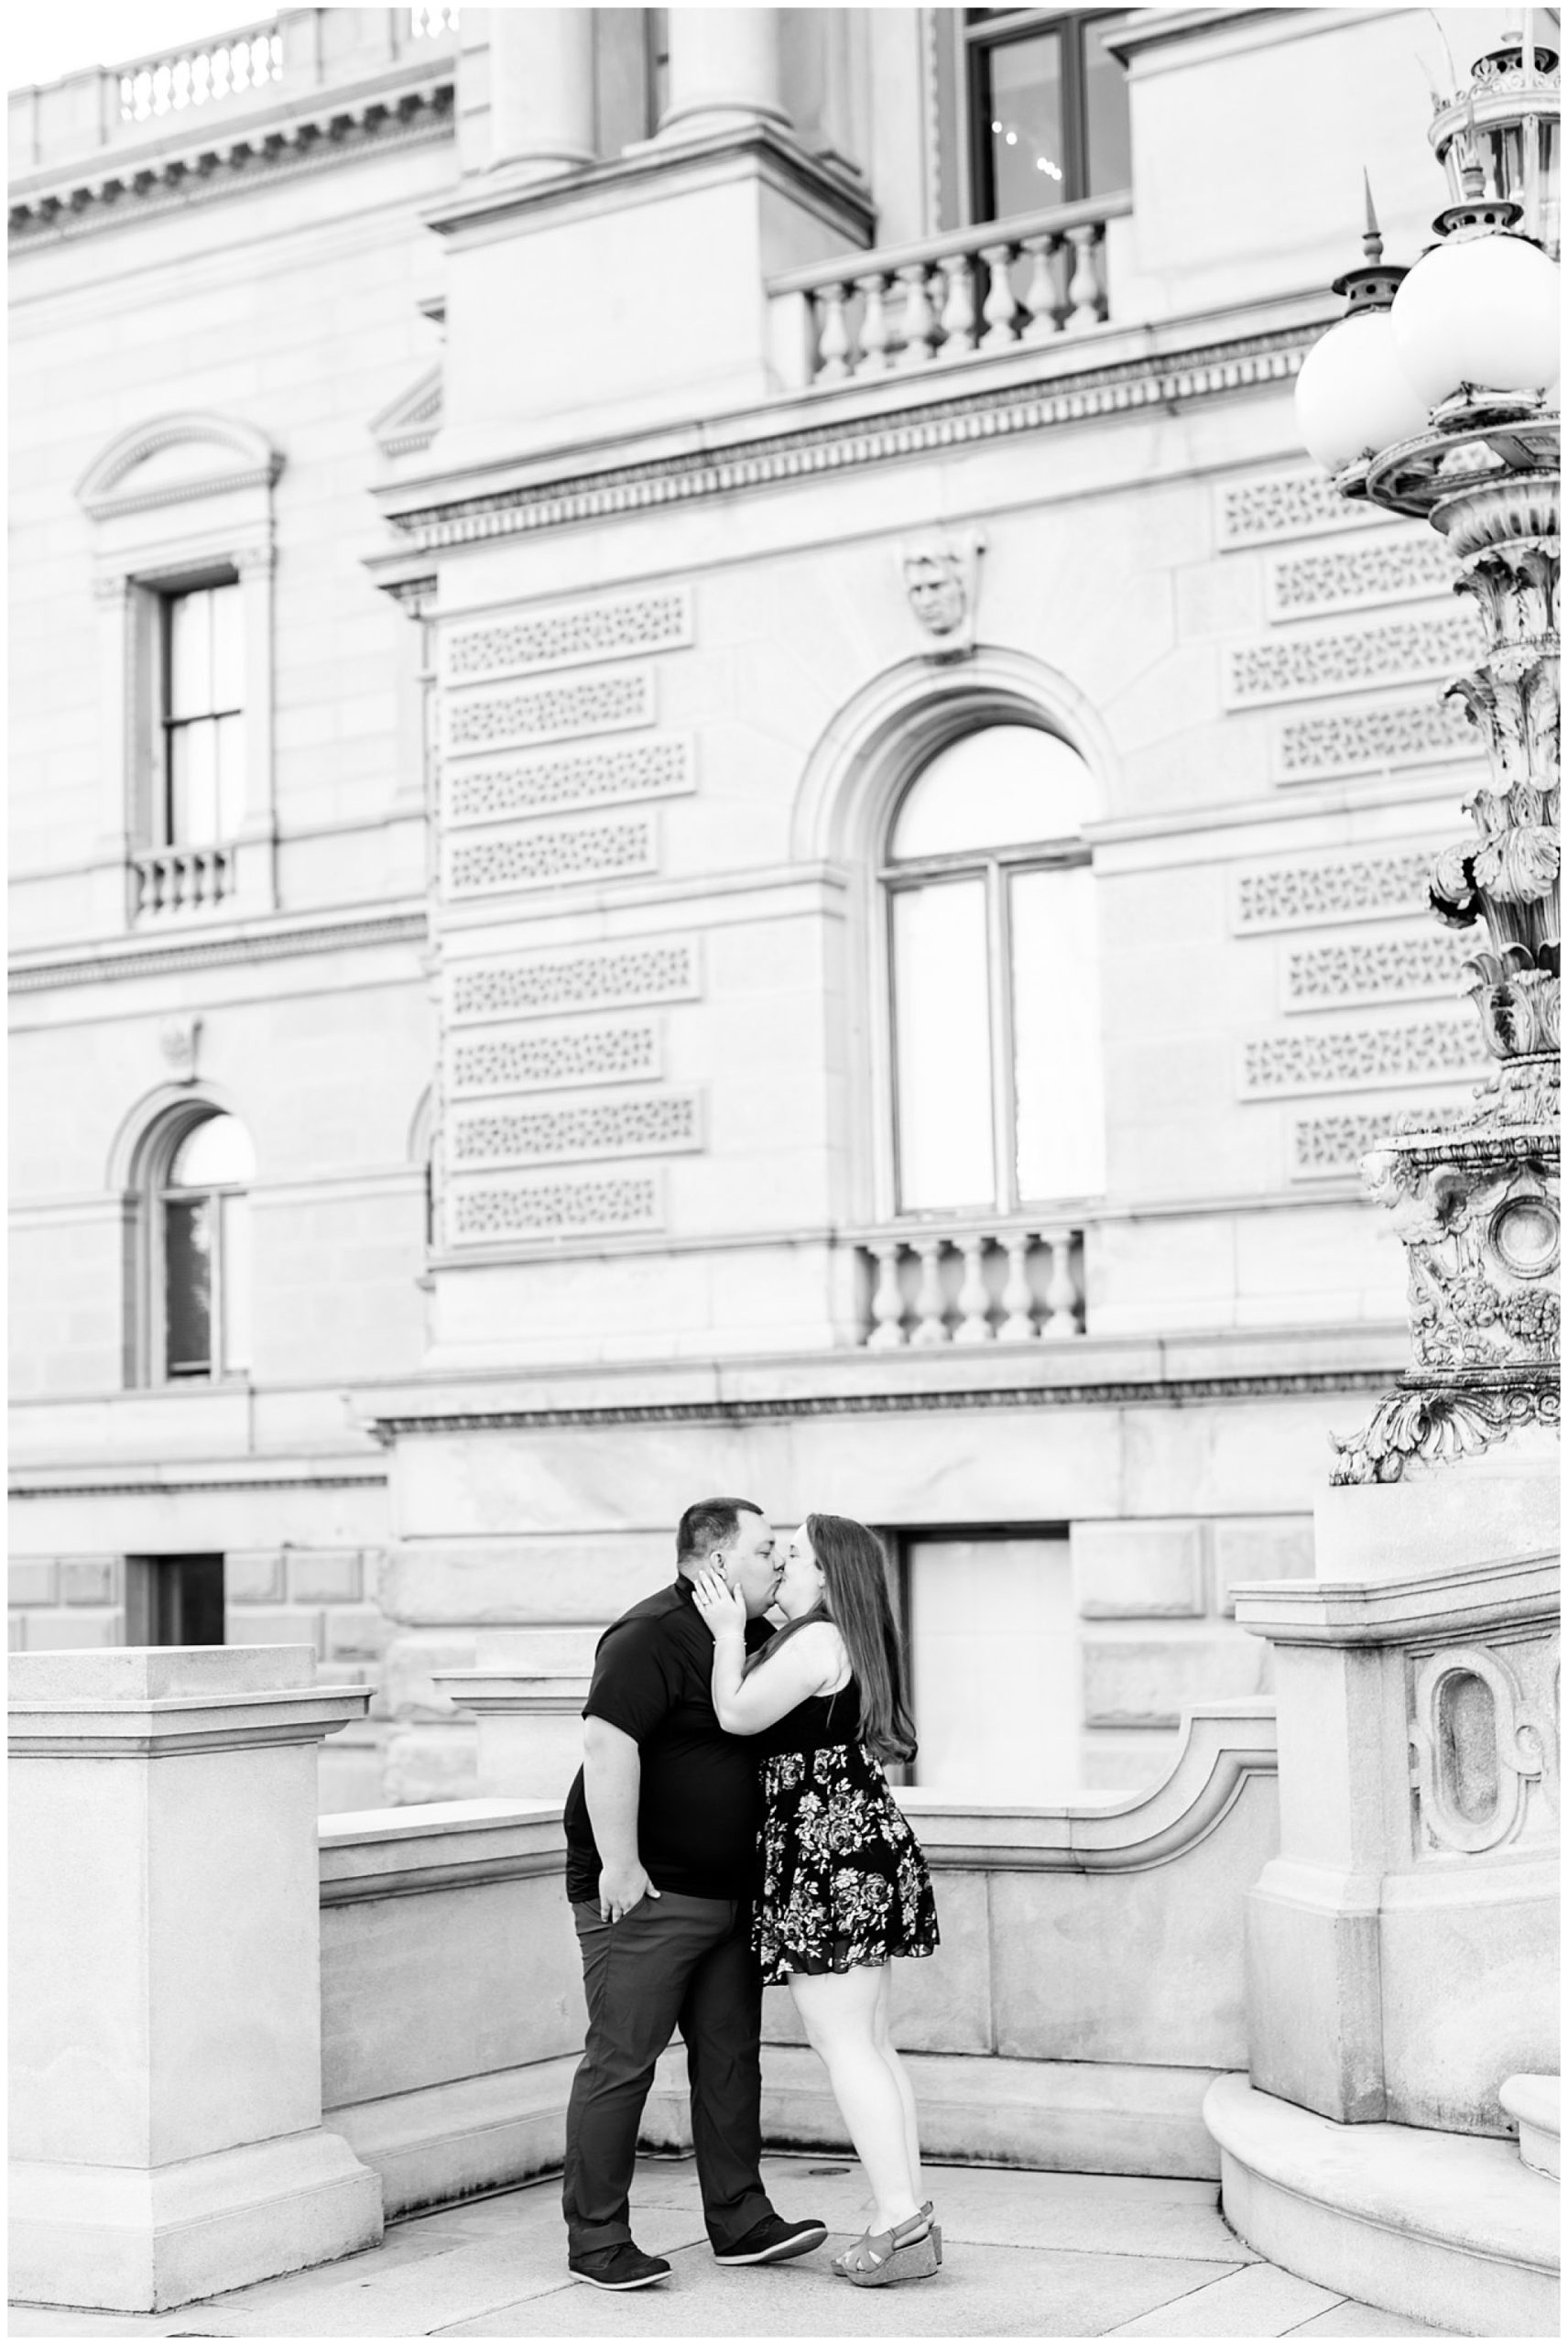 summer Capitol Hill engagement photos, Capitol Hill, Washington DC engagement photos, DC engagement photographer, DC wedding photographer, Rachel E.H. Photography, U.S. Capitol, summer engagement photos, engaged couple, engagement portraits, black and white portrait, Library of Congress